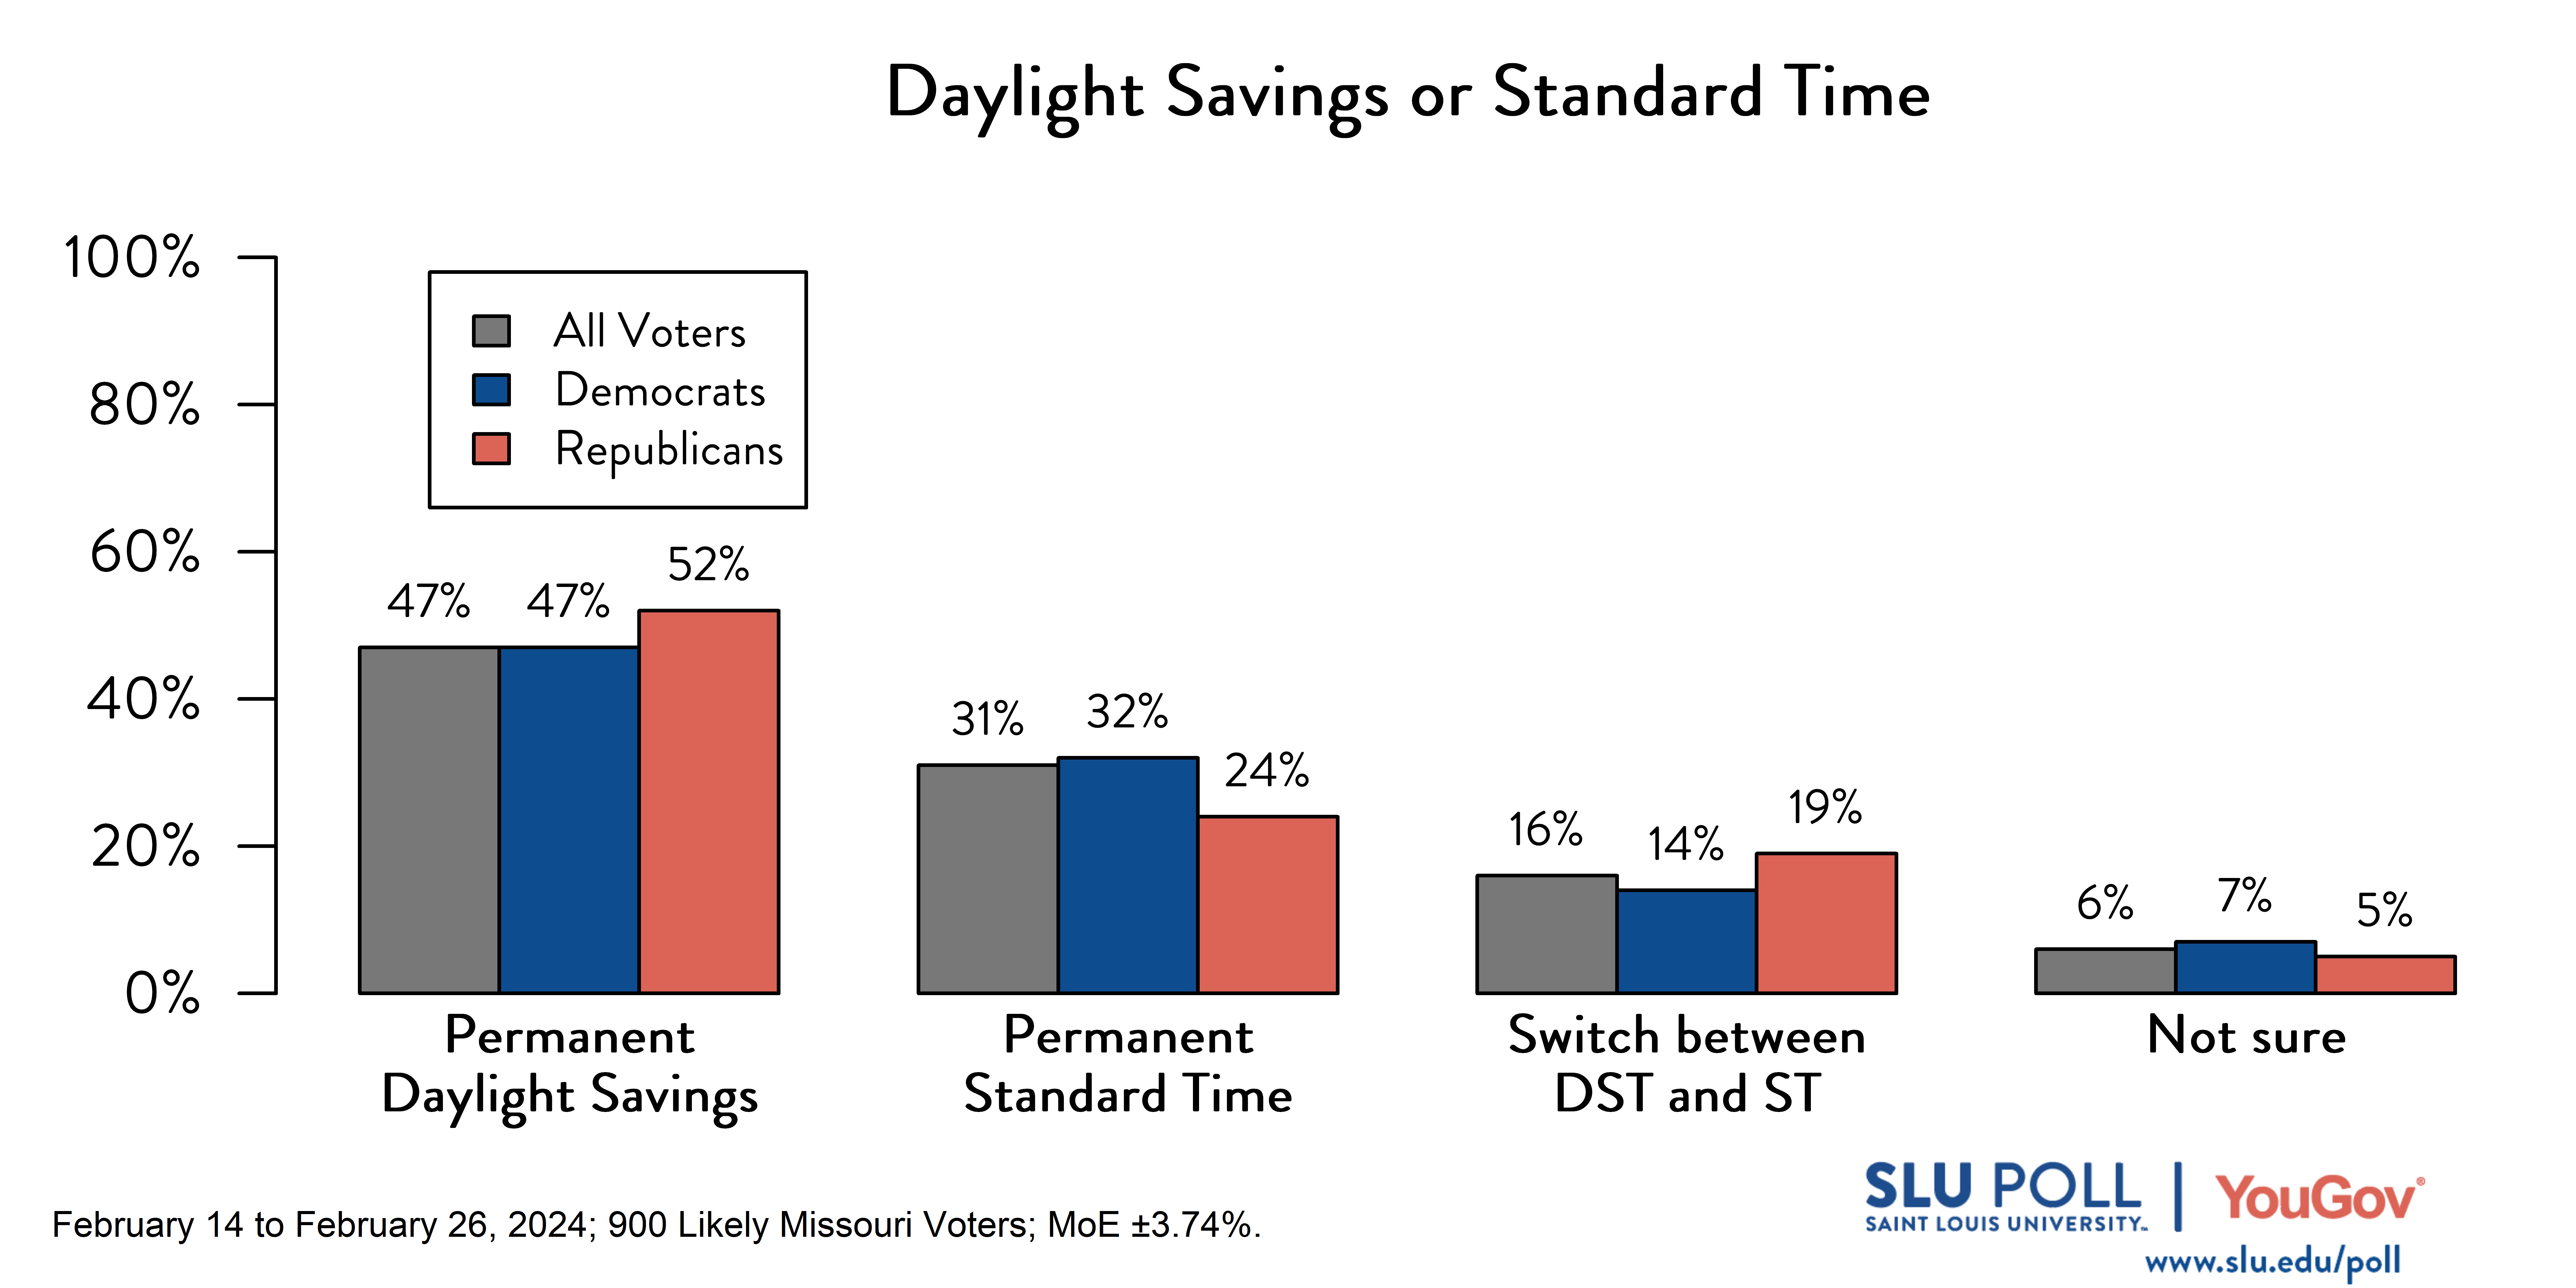 Likely voters' responses to "In Missouri, which of the following would you prefer to see?": 47% Daylight Savings Time all year round with more daylight in the evening and less in the morning, 31% Standard Time all year round with more daylight in the morning and less in the evening, 16% Switch back and forth between Daylight Savings and Standard Time like most states do now, and 6% Not sure. Democratic voters' responses: 47% Daylight Savings Time all year round with more daylight in the evening and less in the morning, 32% Standard Time all year round with more daylight in the morning and less in the evening, 14% Switch back and forth between Daylight Savings and Standard Time like most states do now, and 7% Not sure. Republican voters' responses:  52% Daylight Savings Time all year round with more daylight in the evening and less in the morning, 24% Standard Time all year round with more daylight in the morning and less in the evening, 19% Switch back and forth between Daylight Savings and Standard Time like most states do now, and 5% Not sure.